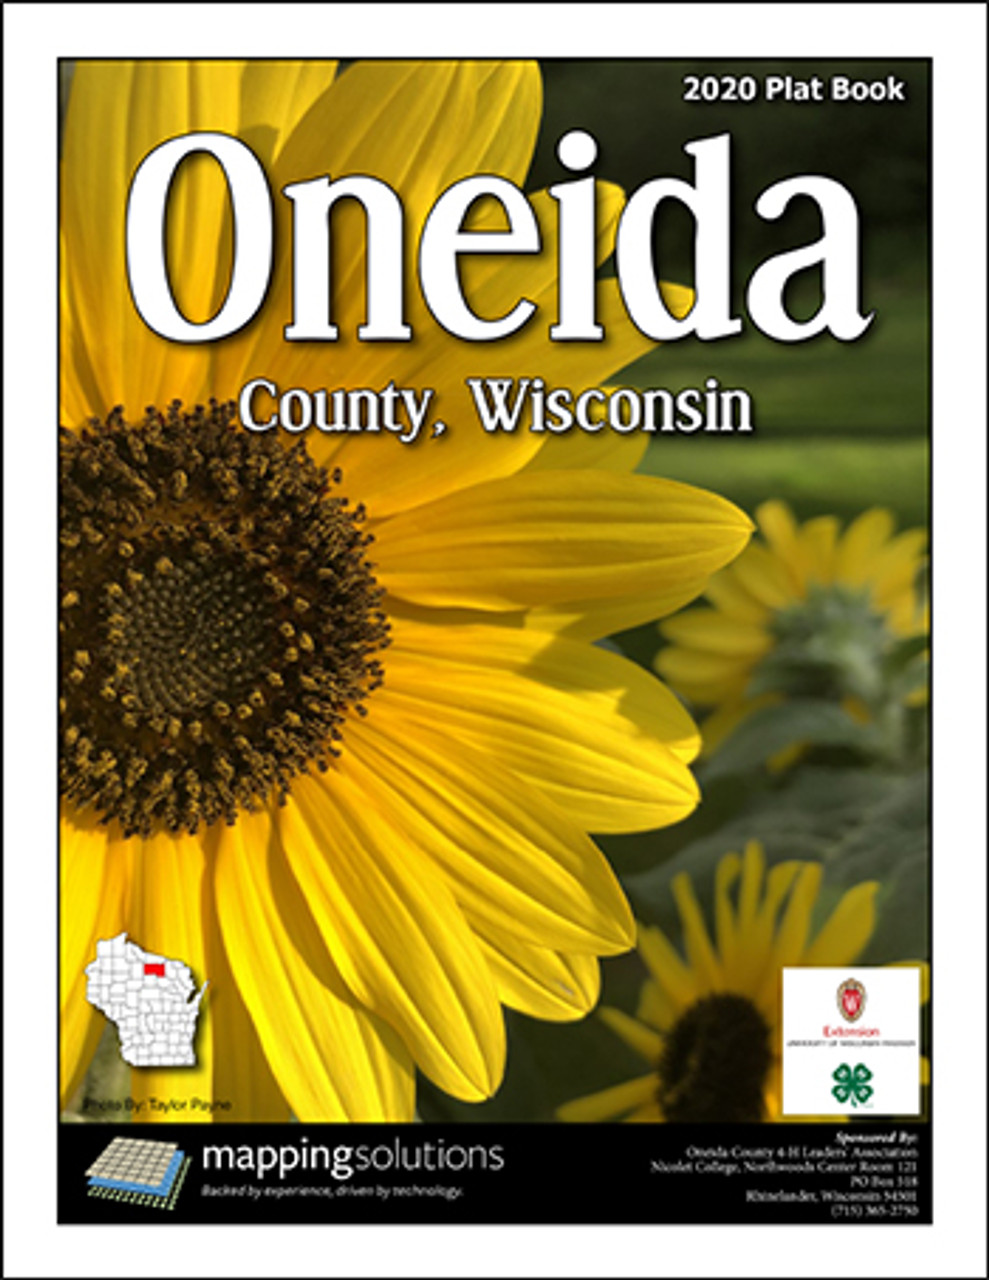 Oneida County Wisconsin 2020 Plat Book Mapping Solutions